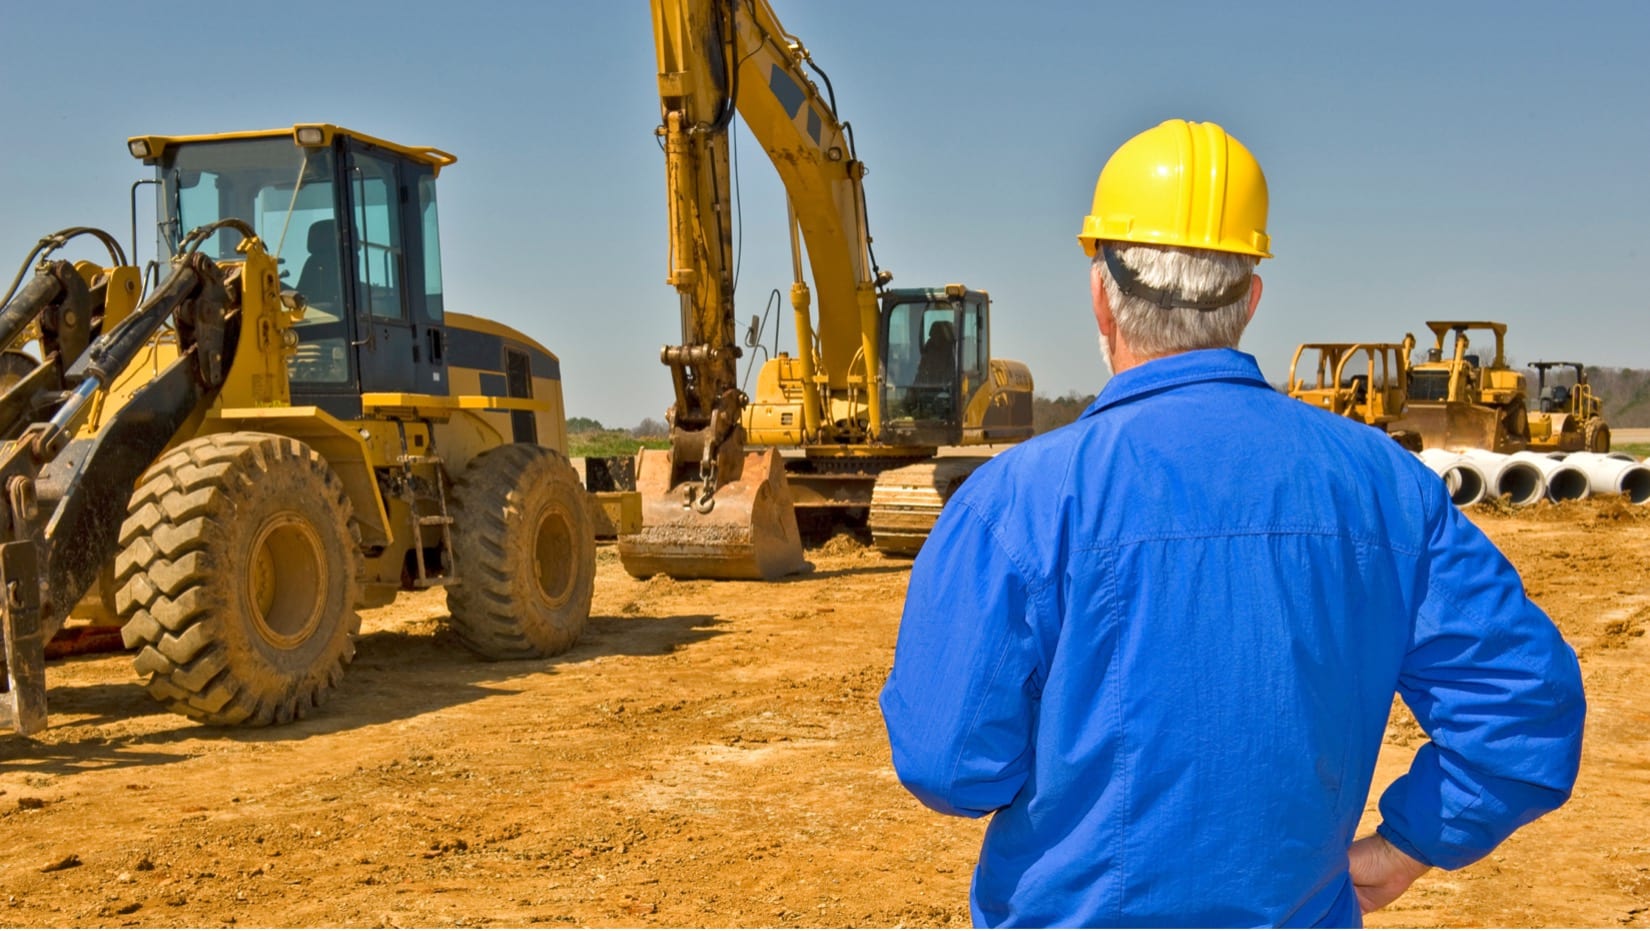 5 Tips for Safety Around Heavy Equipment